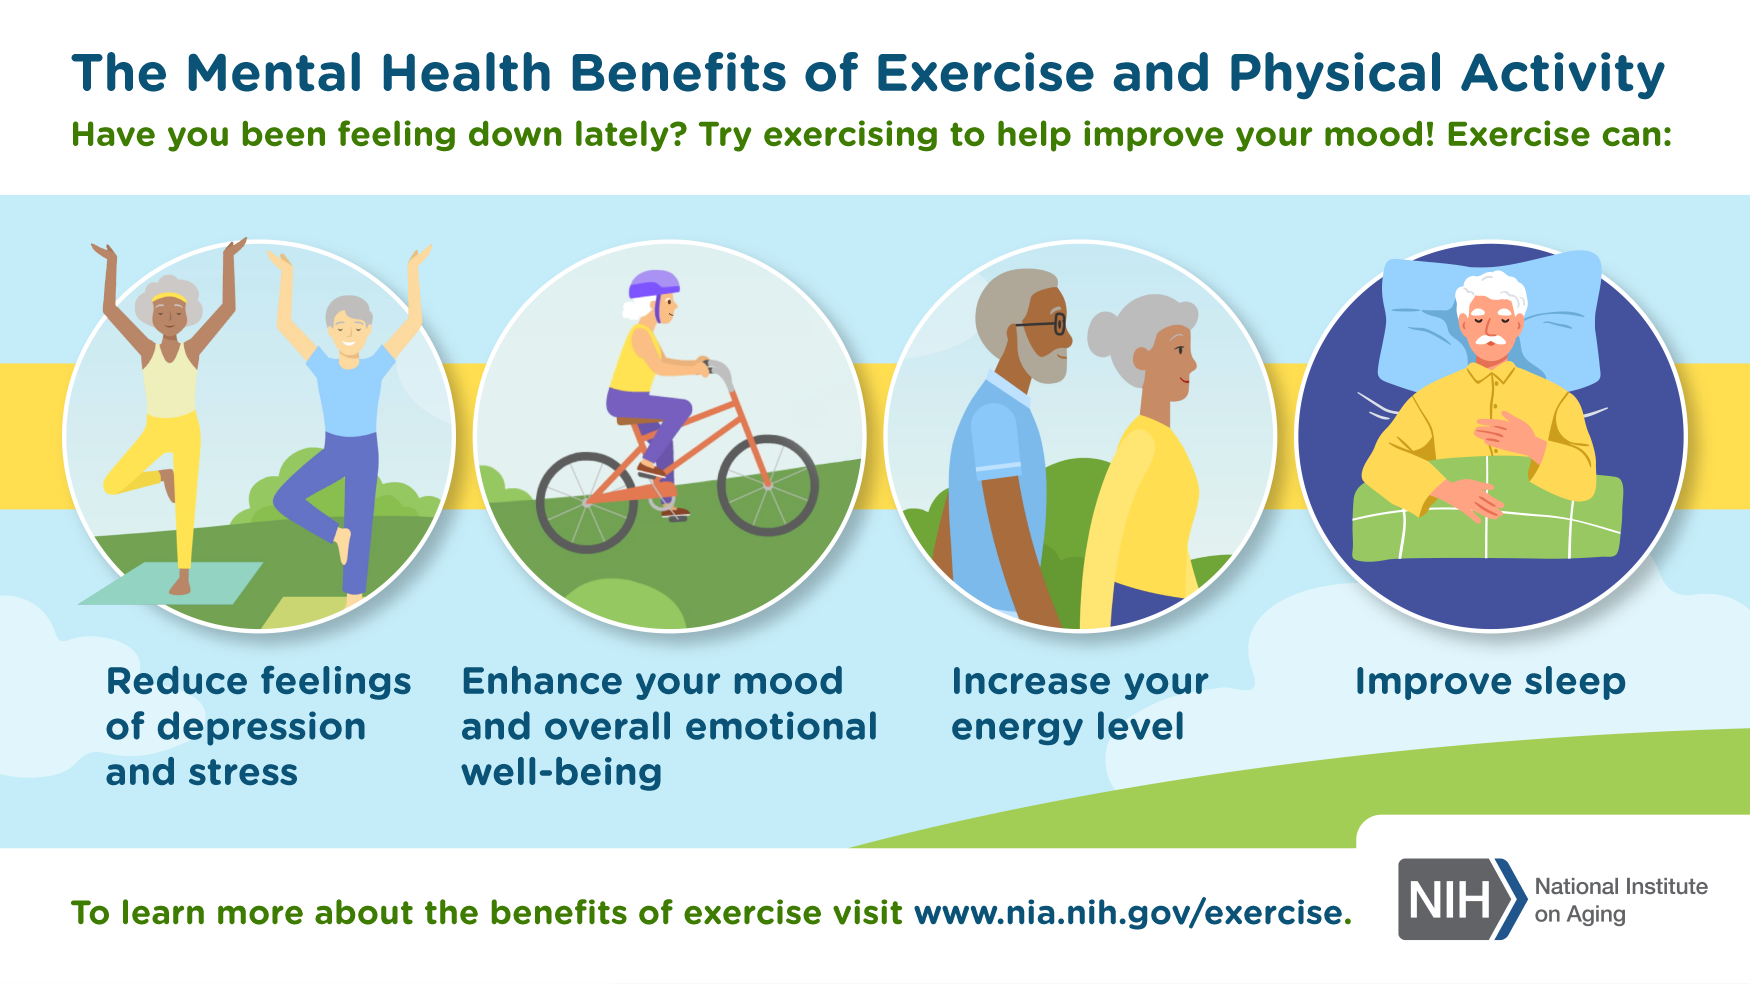 How does exercise contribute to positive emotional health?